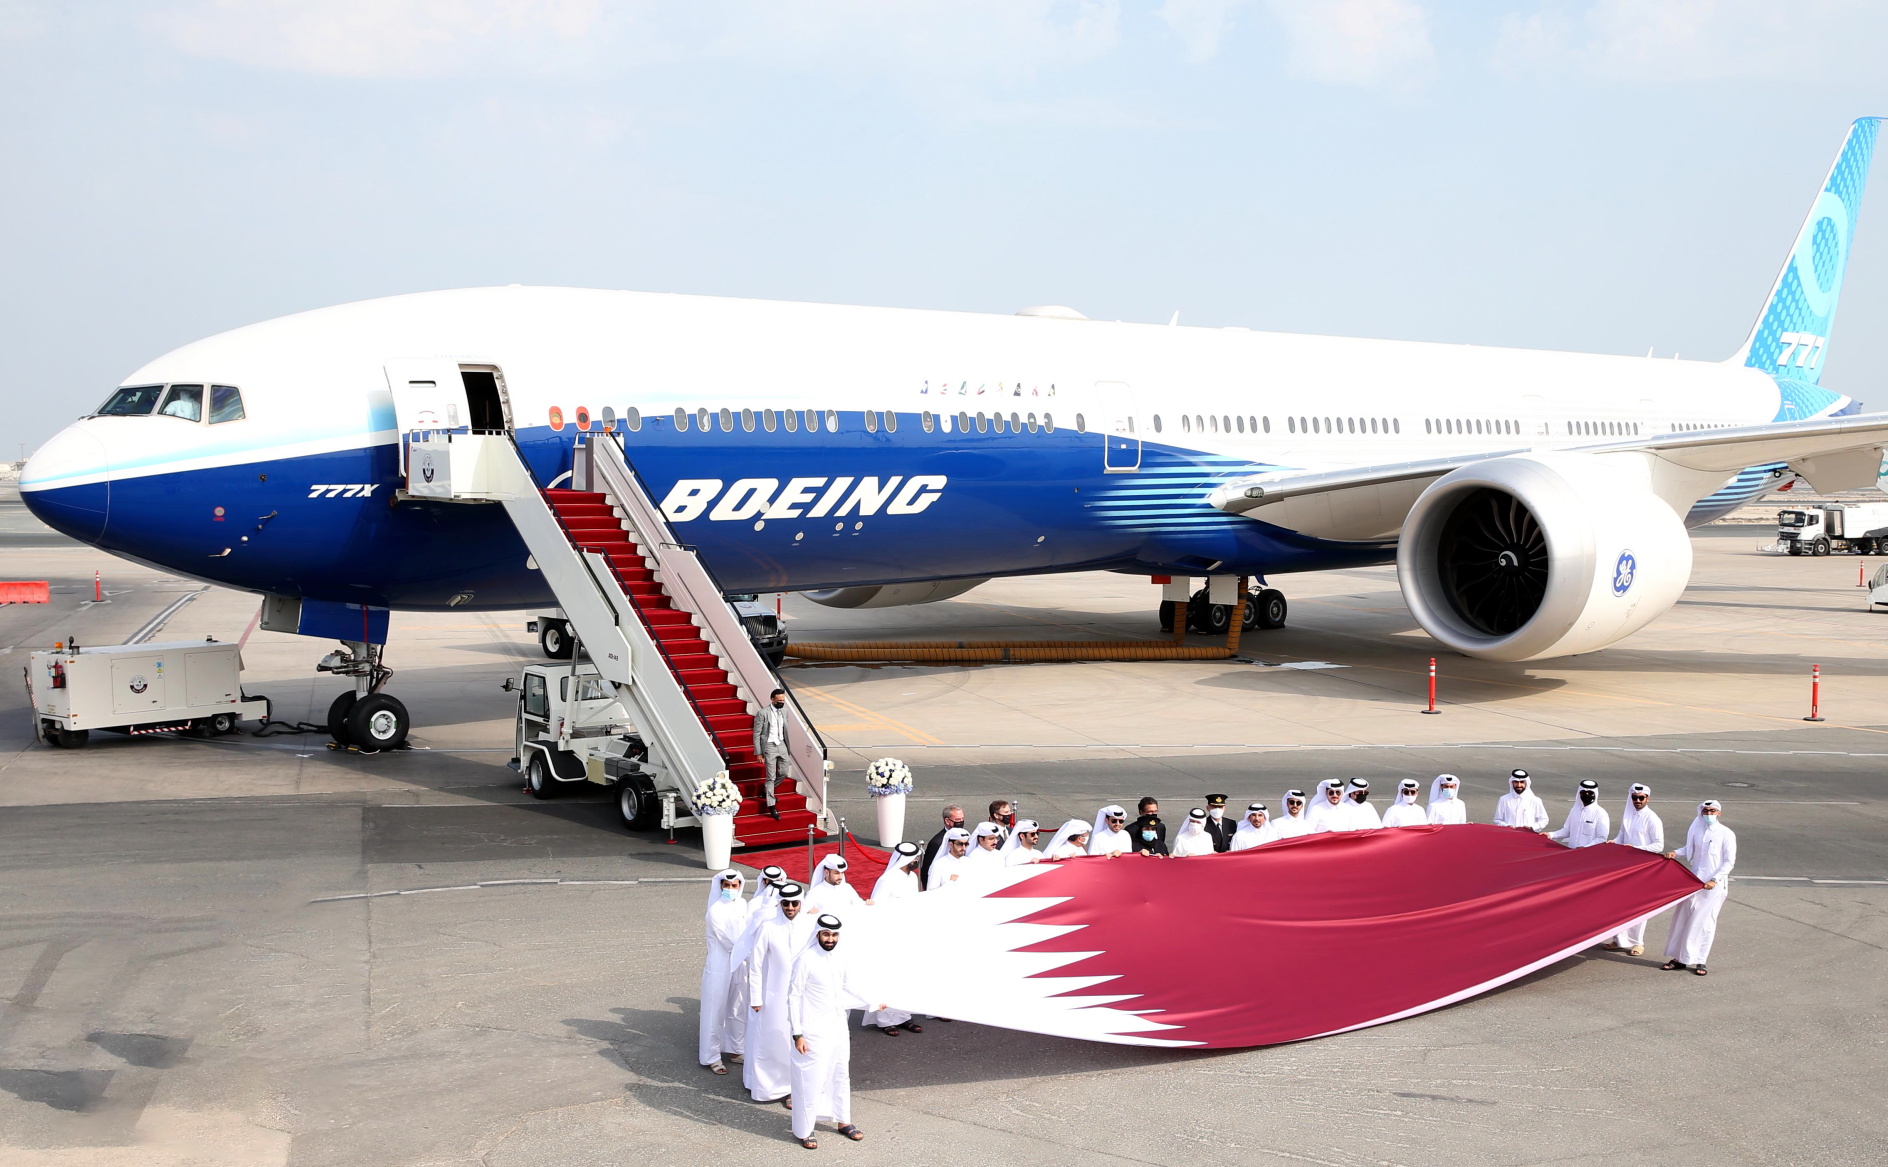 Boeing 777-9 aircraft in Doha, Qatar. Click to enlarge.